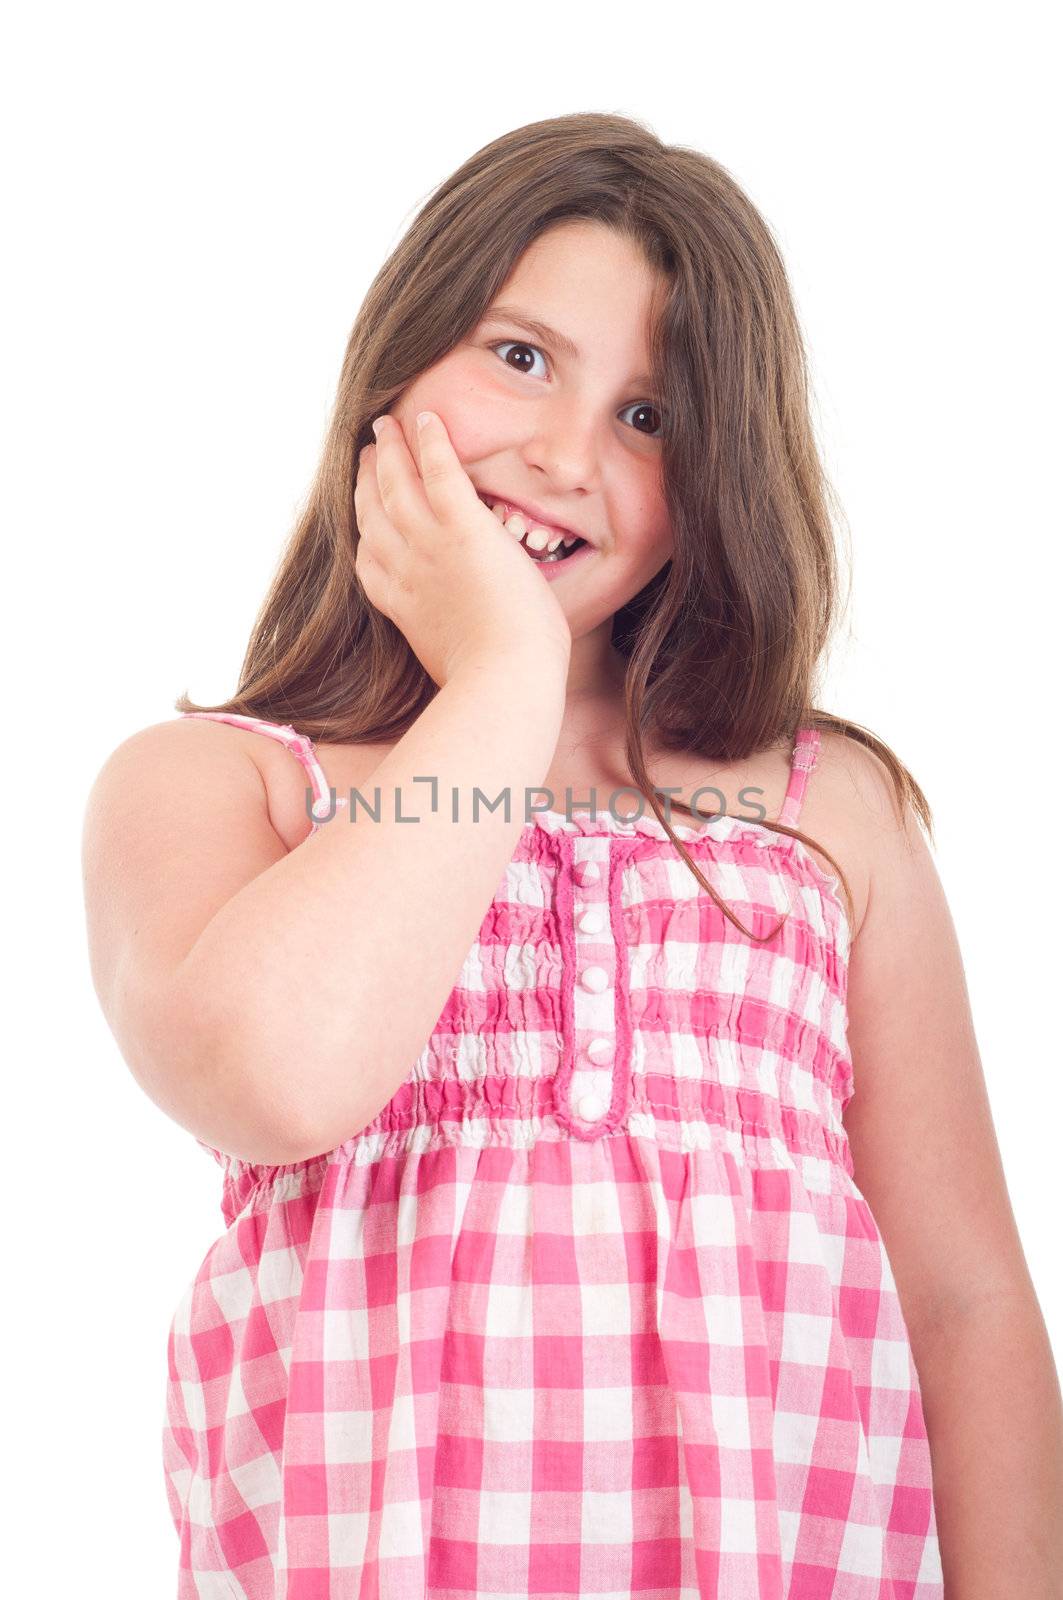 surprised and adorable little girl portrait smiling in a pink top (isolated on white background) 